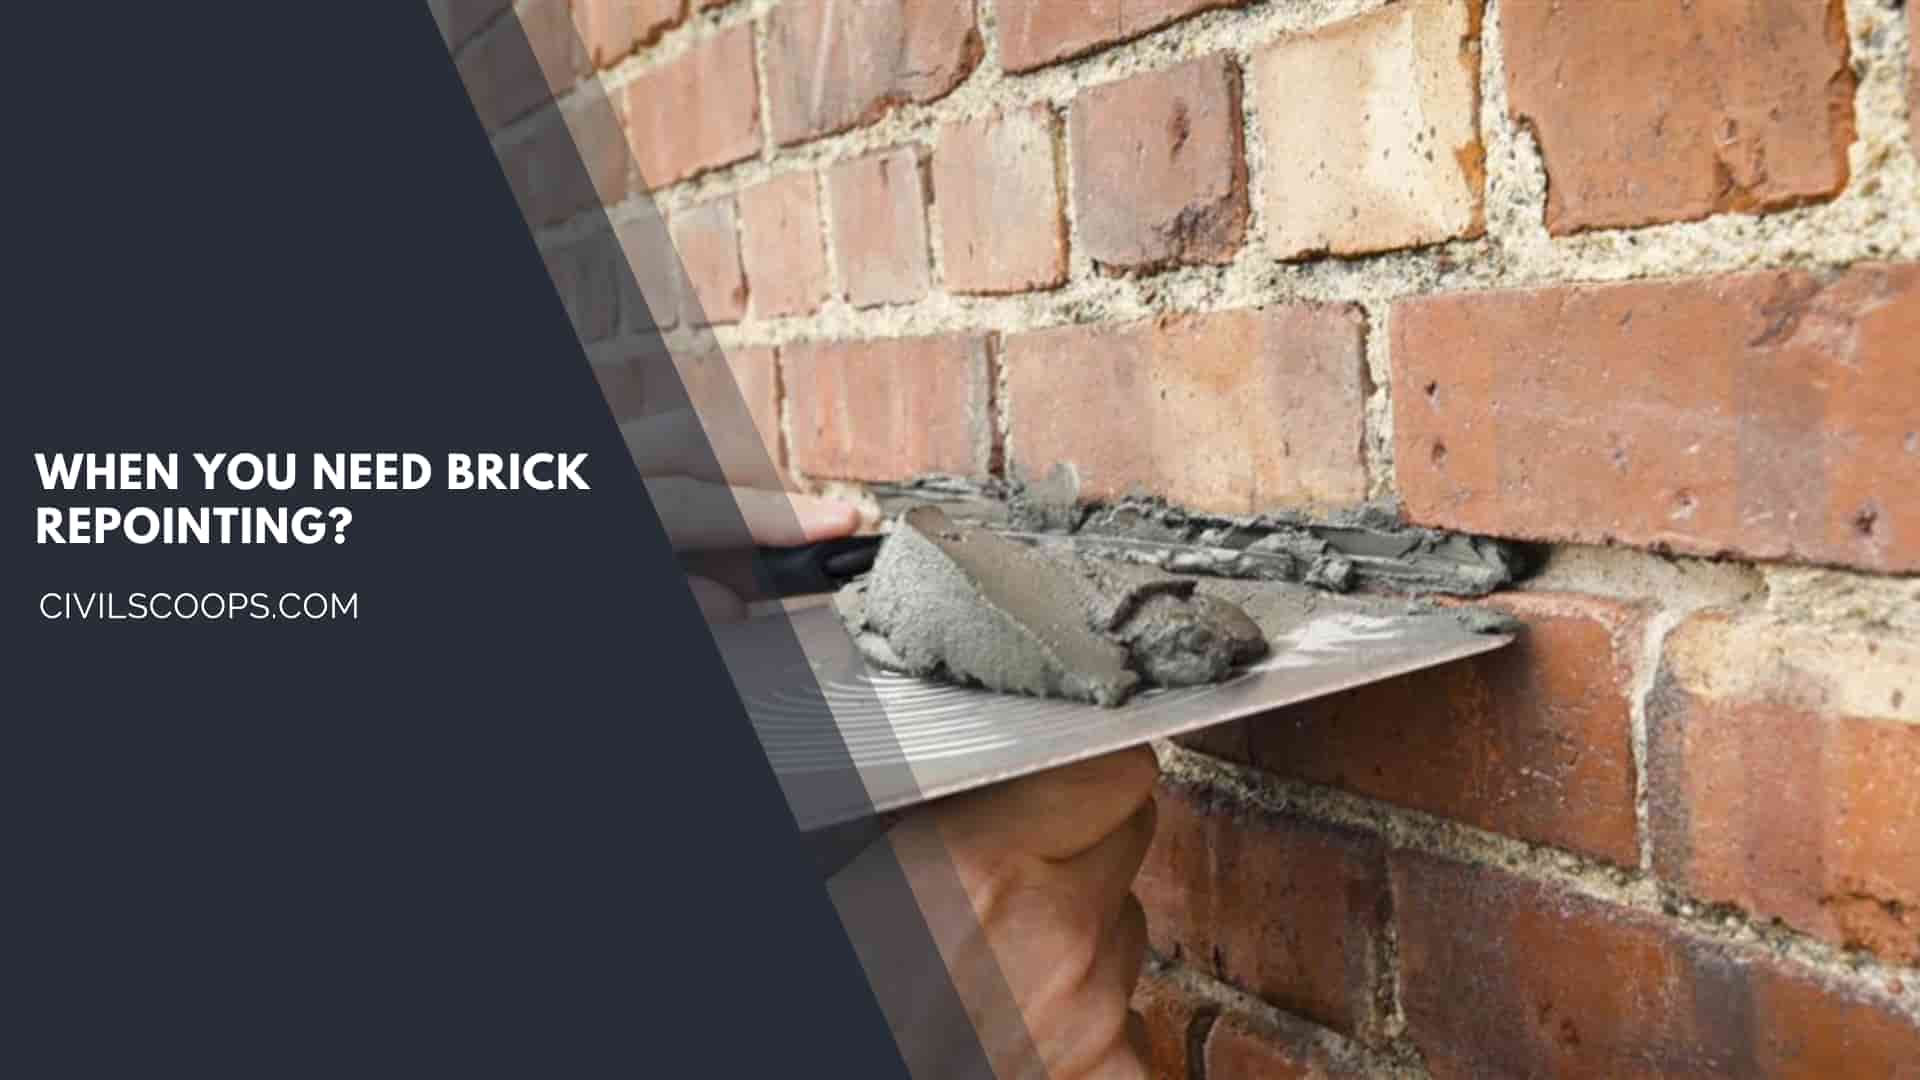 When You Need Brick Repointing?